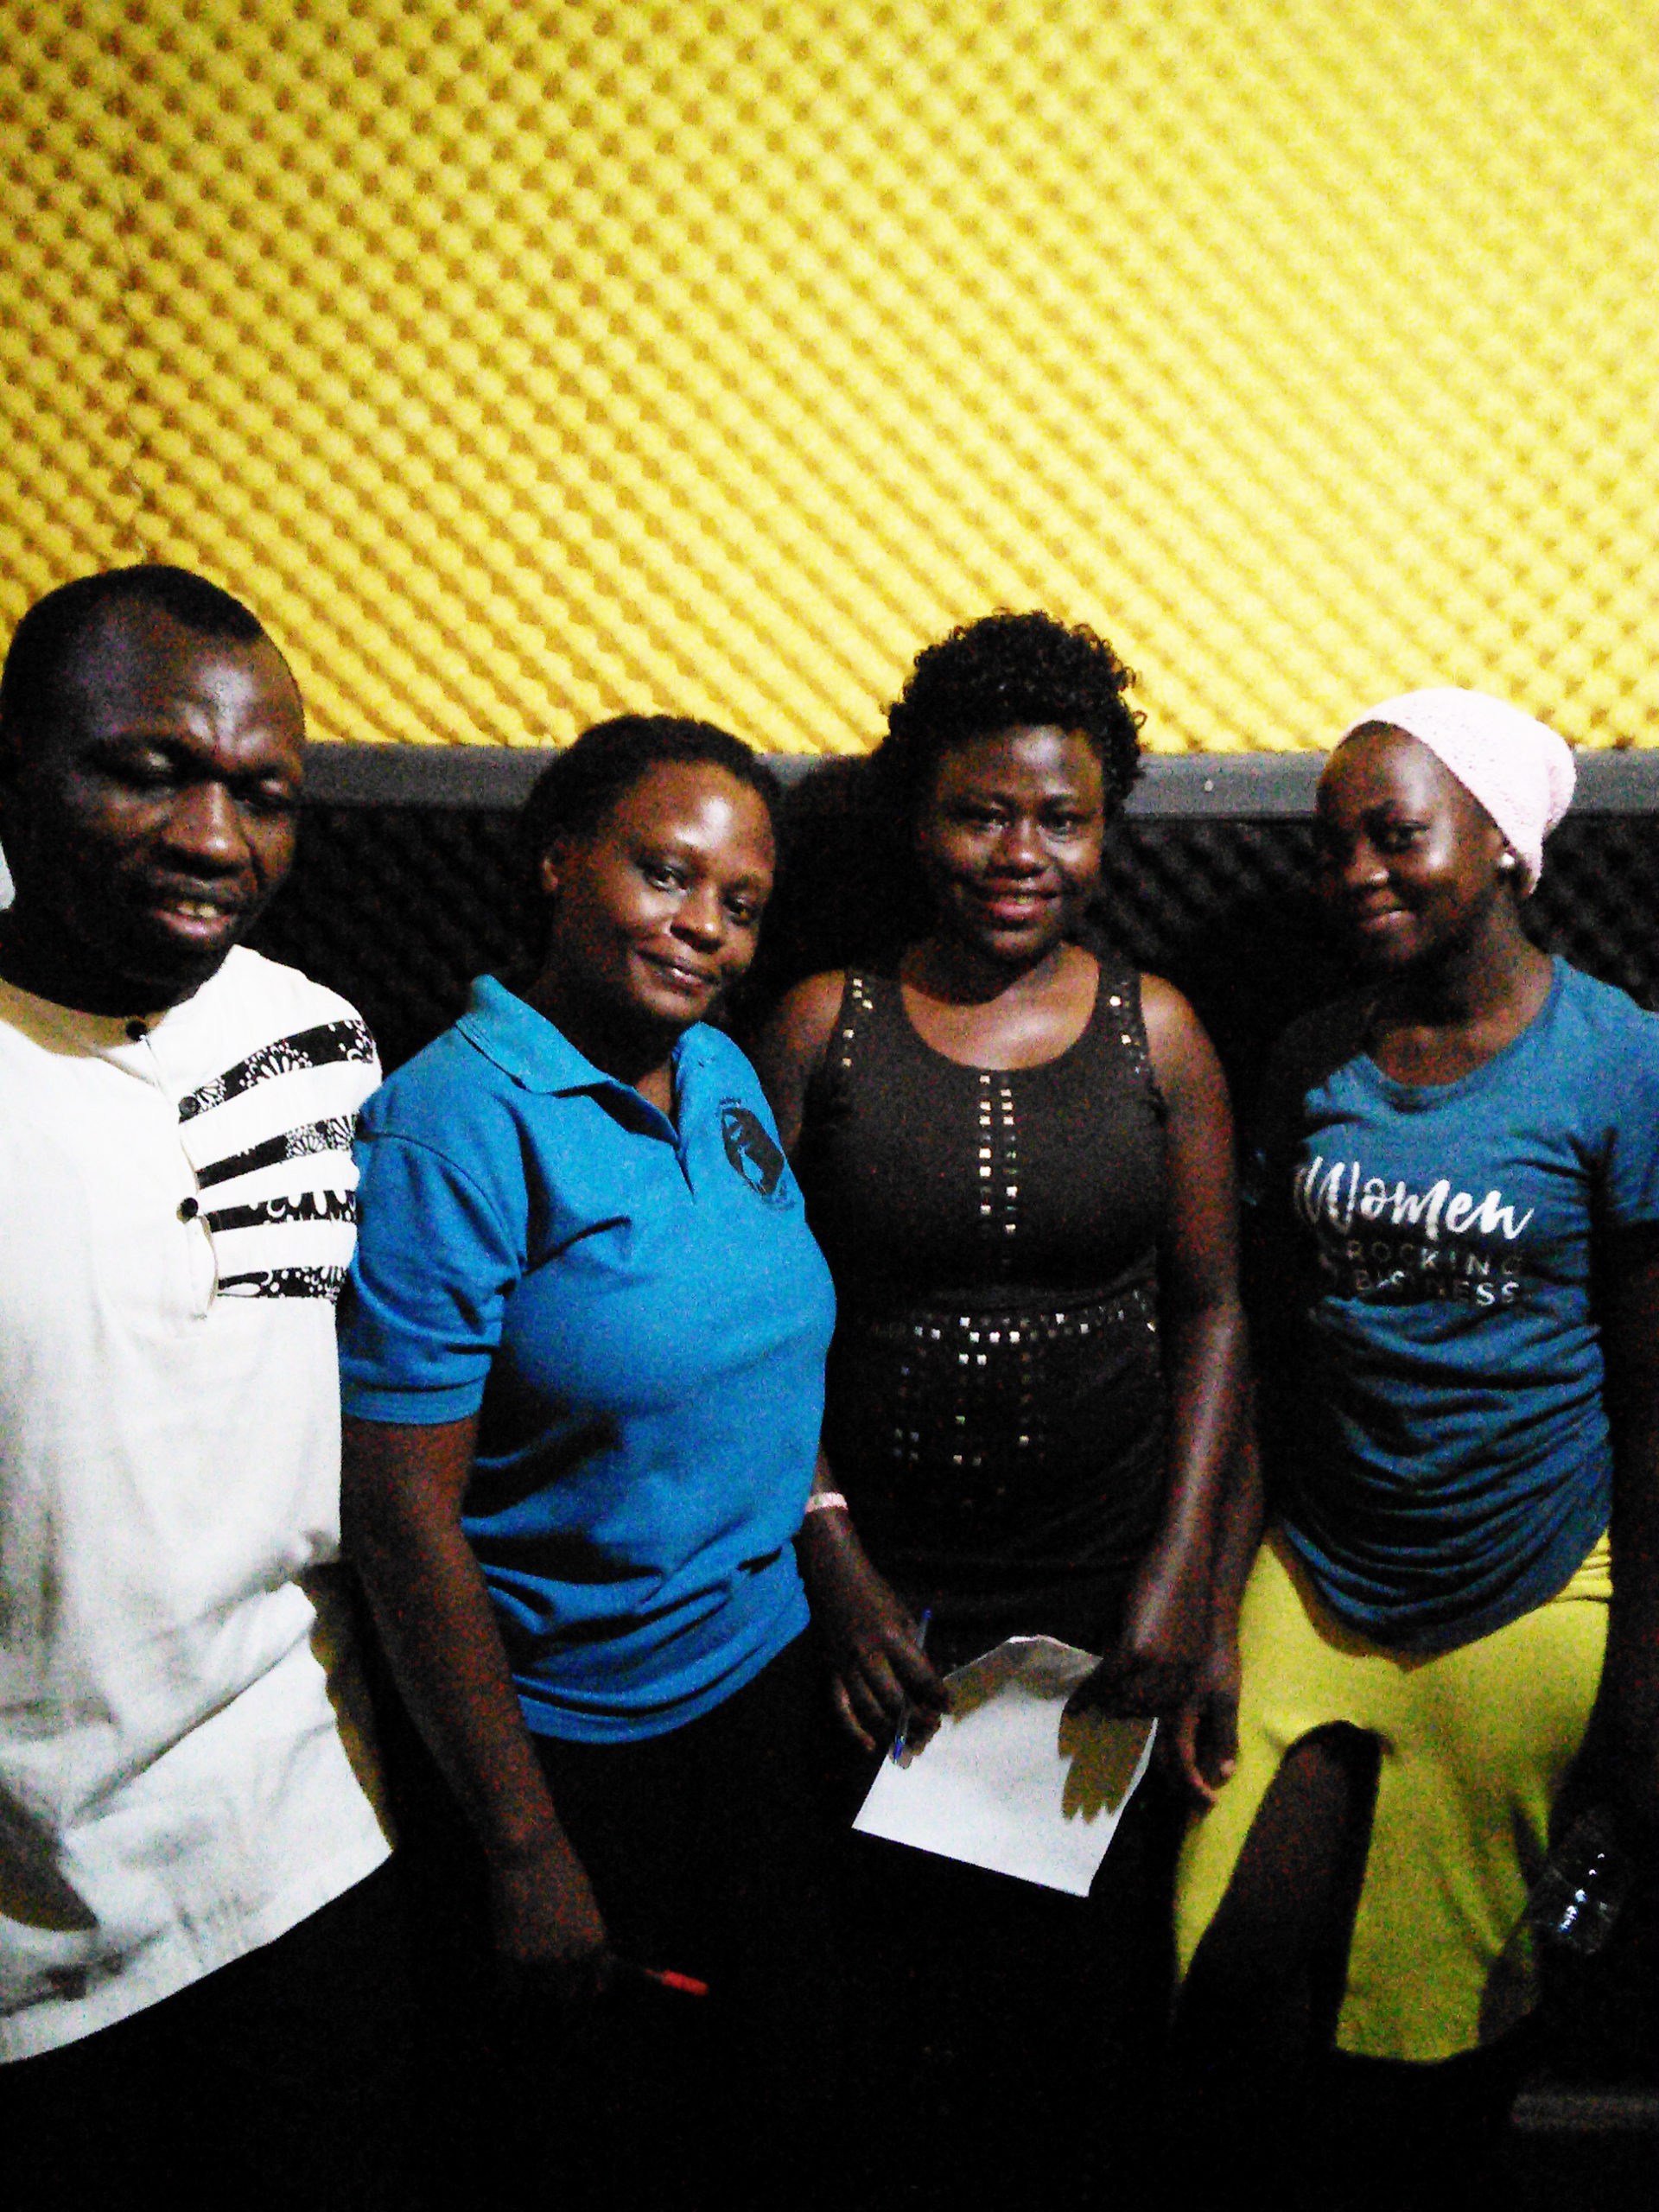 Girl Power Hour Radio Show Intercepts a Forced Child Marriage in Uganda